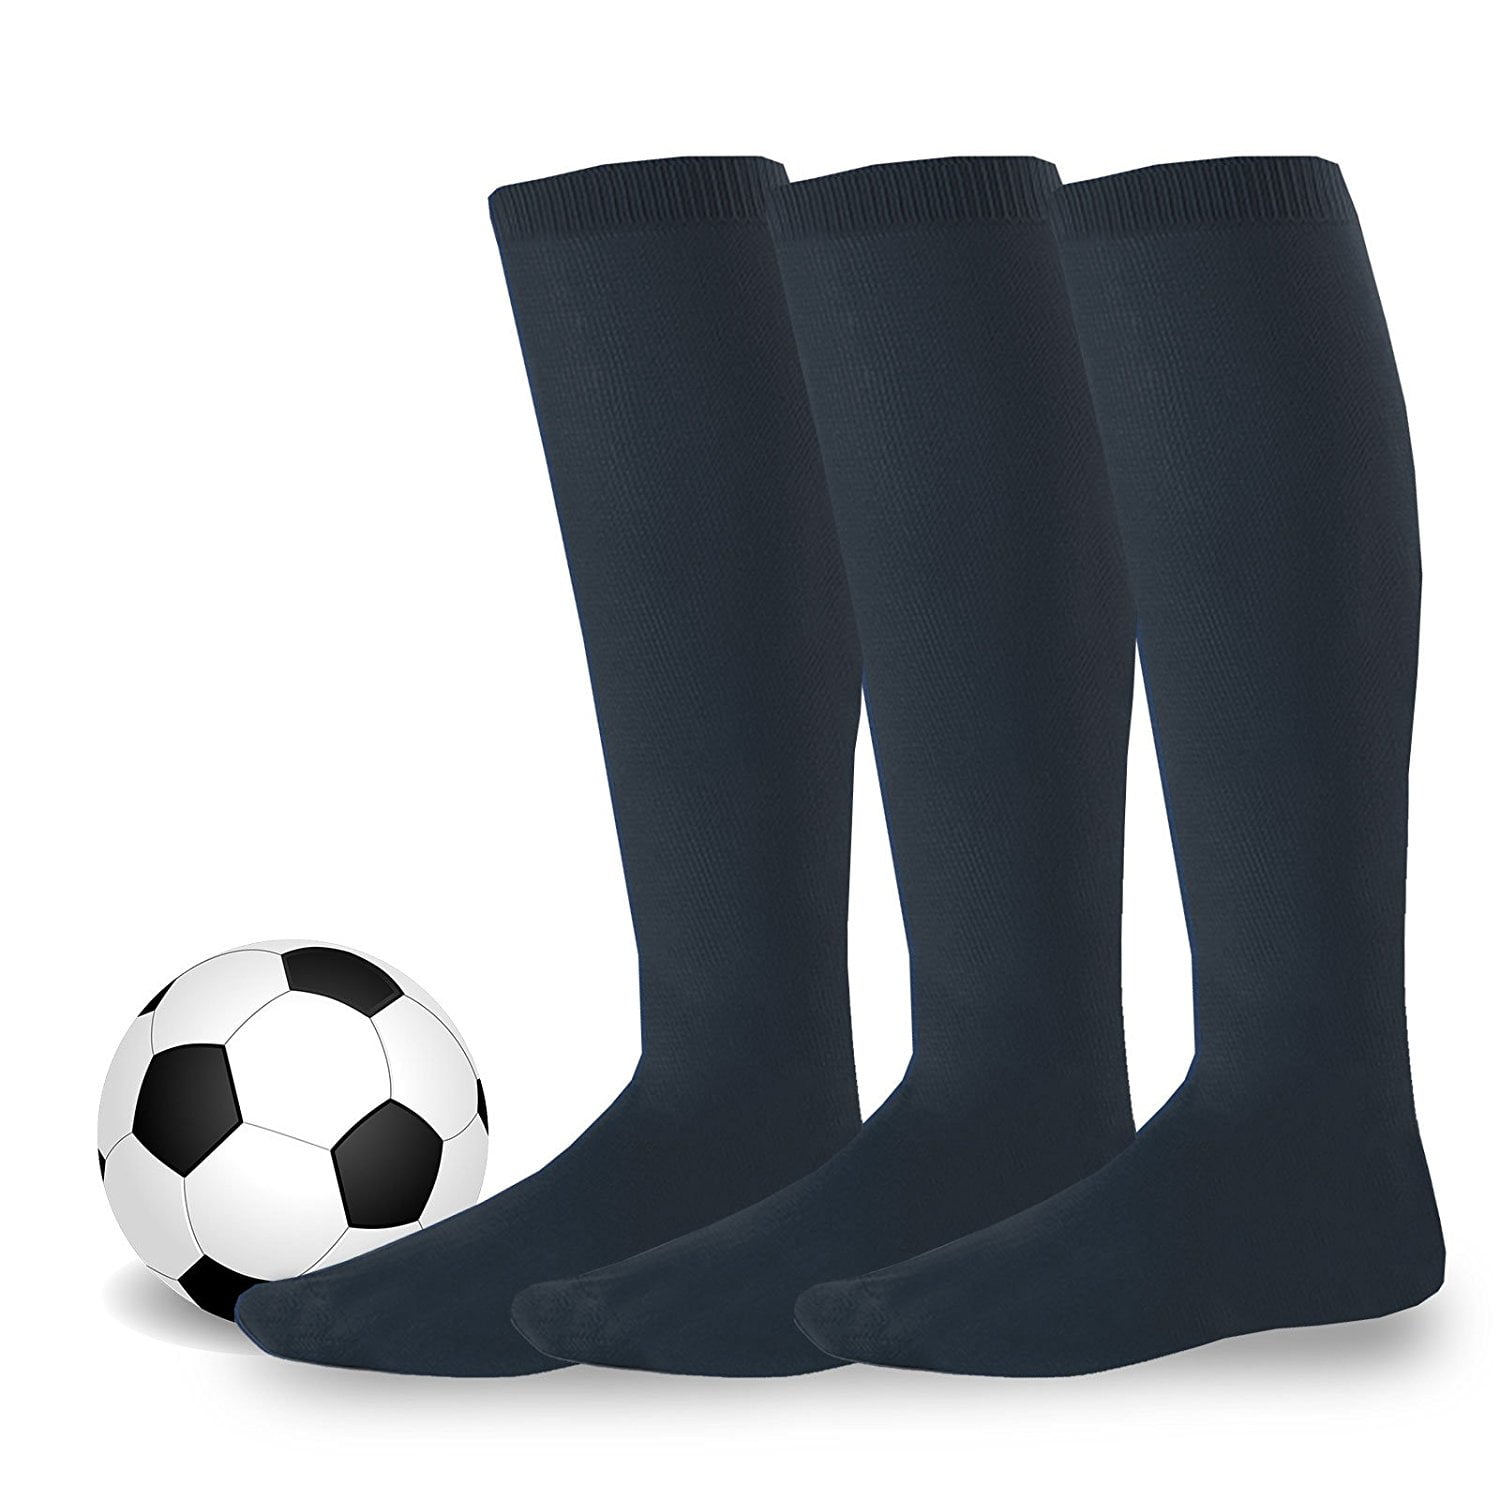 Athletic Sports Socks for Unisex Soccer Socks Team Sports Socks with Cushion Socks Multi-Pack for Youth to Adult 